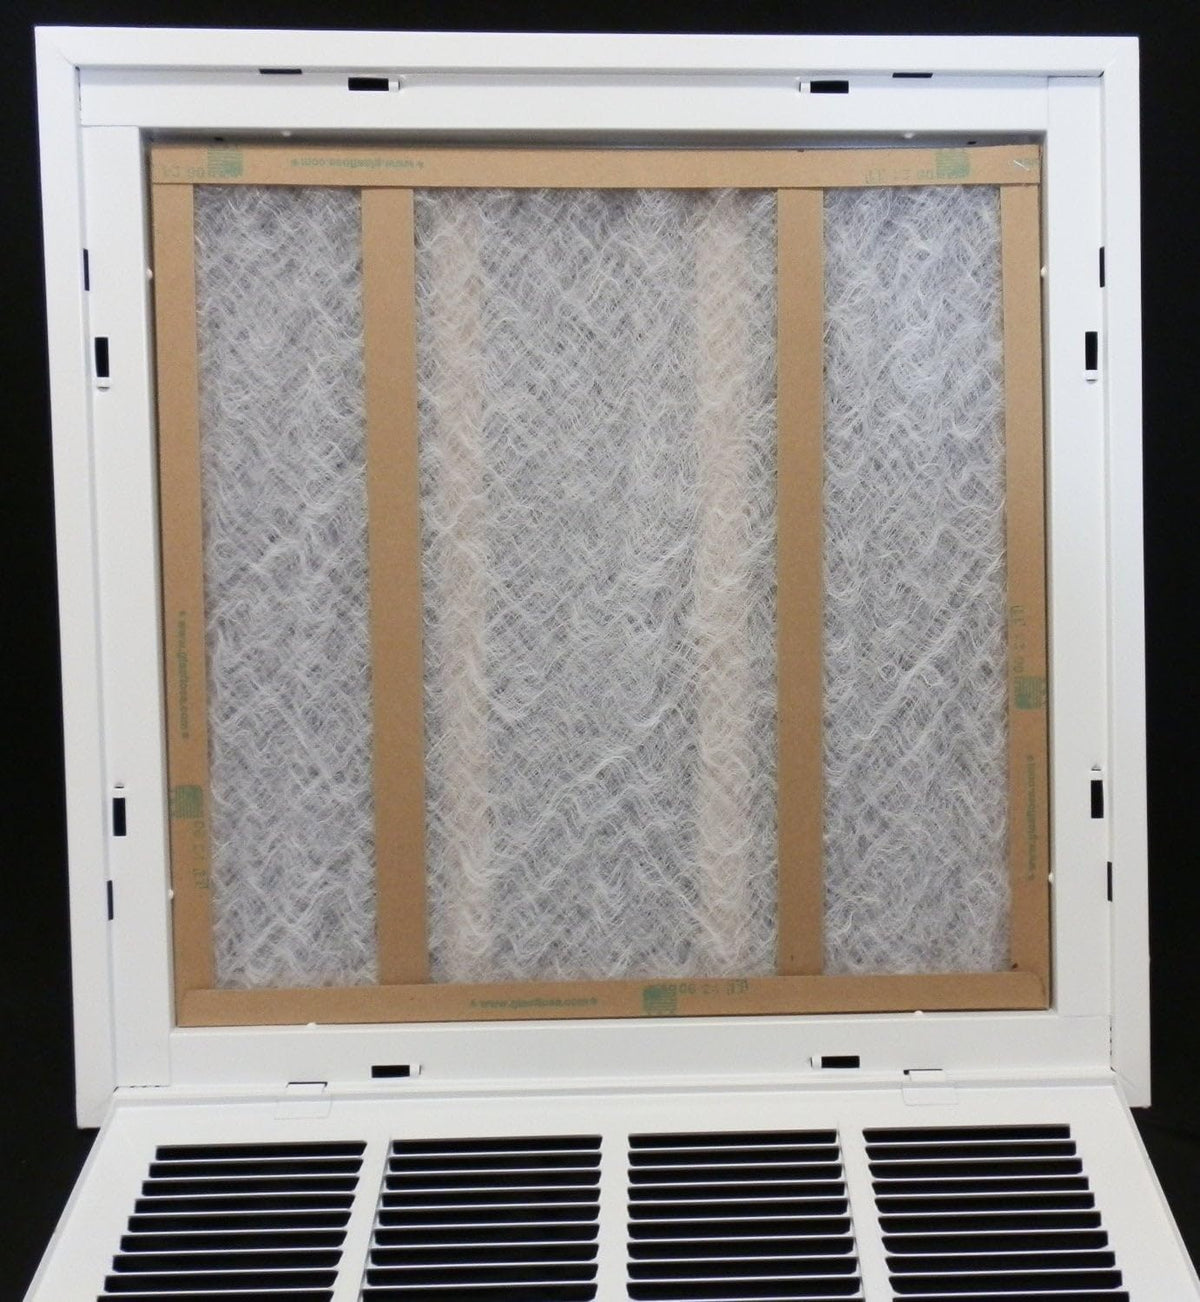 25&quot; X 32&quot; Steel Return Air Filter Grille for 1&quot; Filter - Fixed Hinged - [Outer Dimensions: 27 5/8&quot; X 34 5/8&quot;]